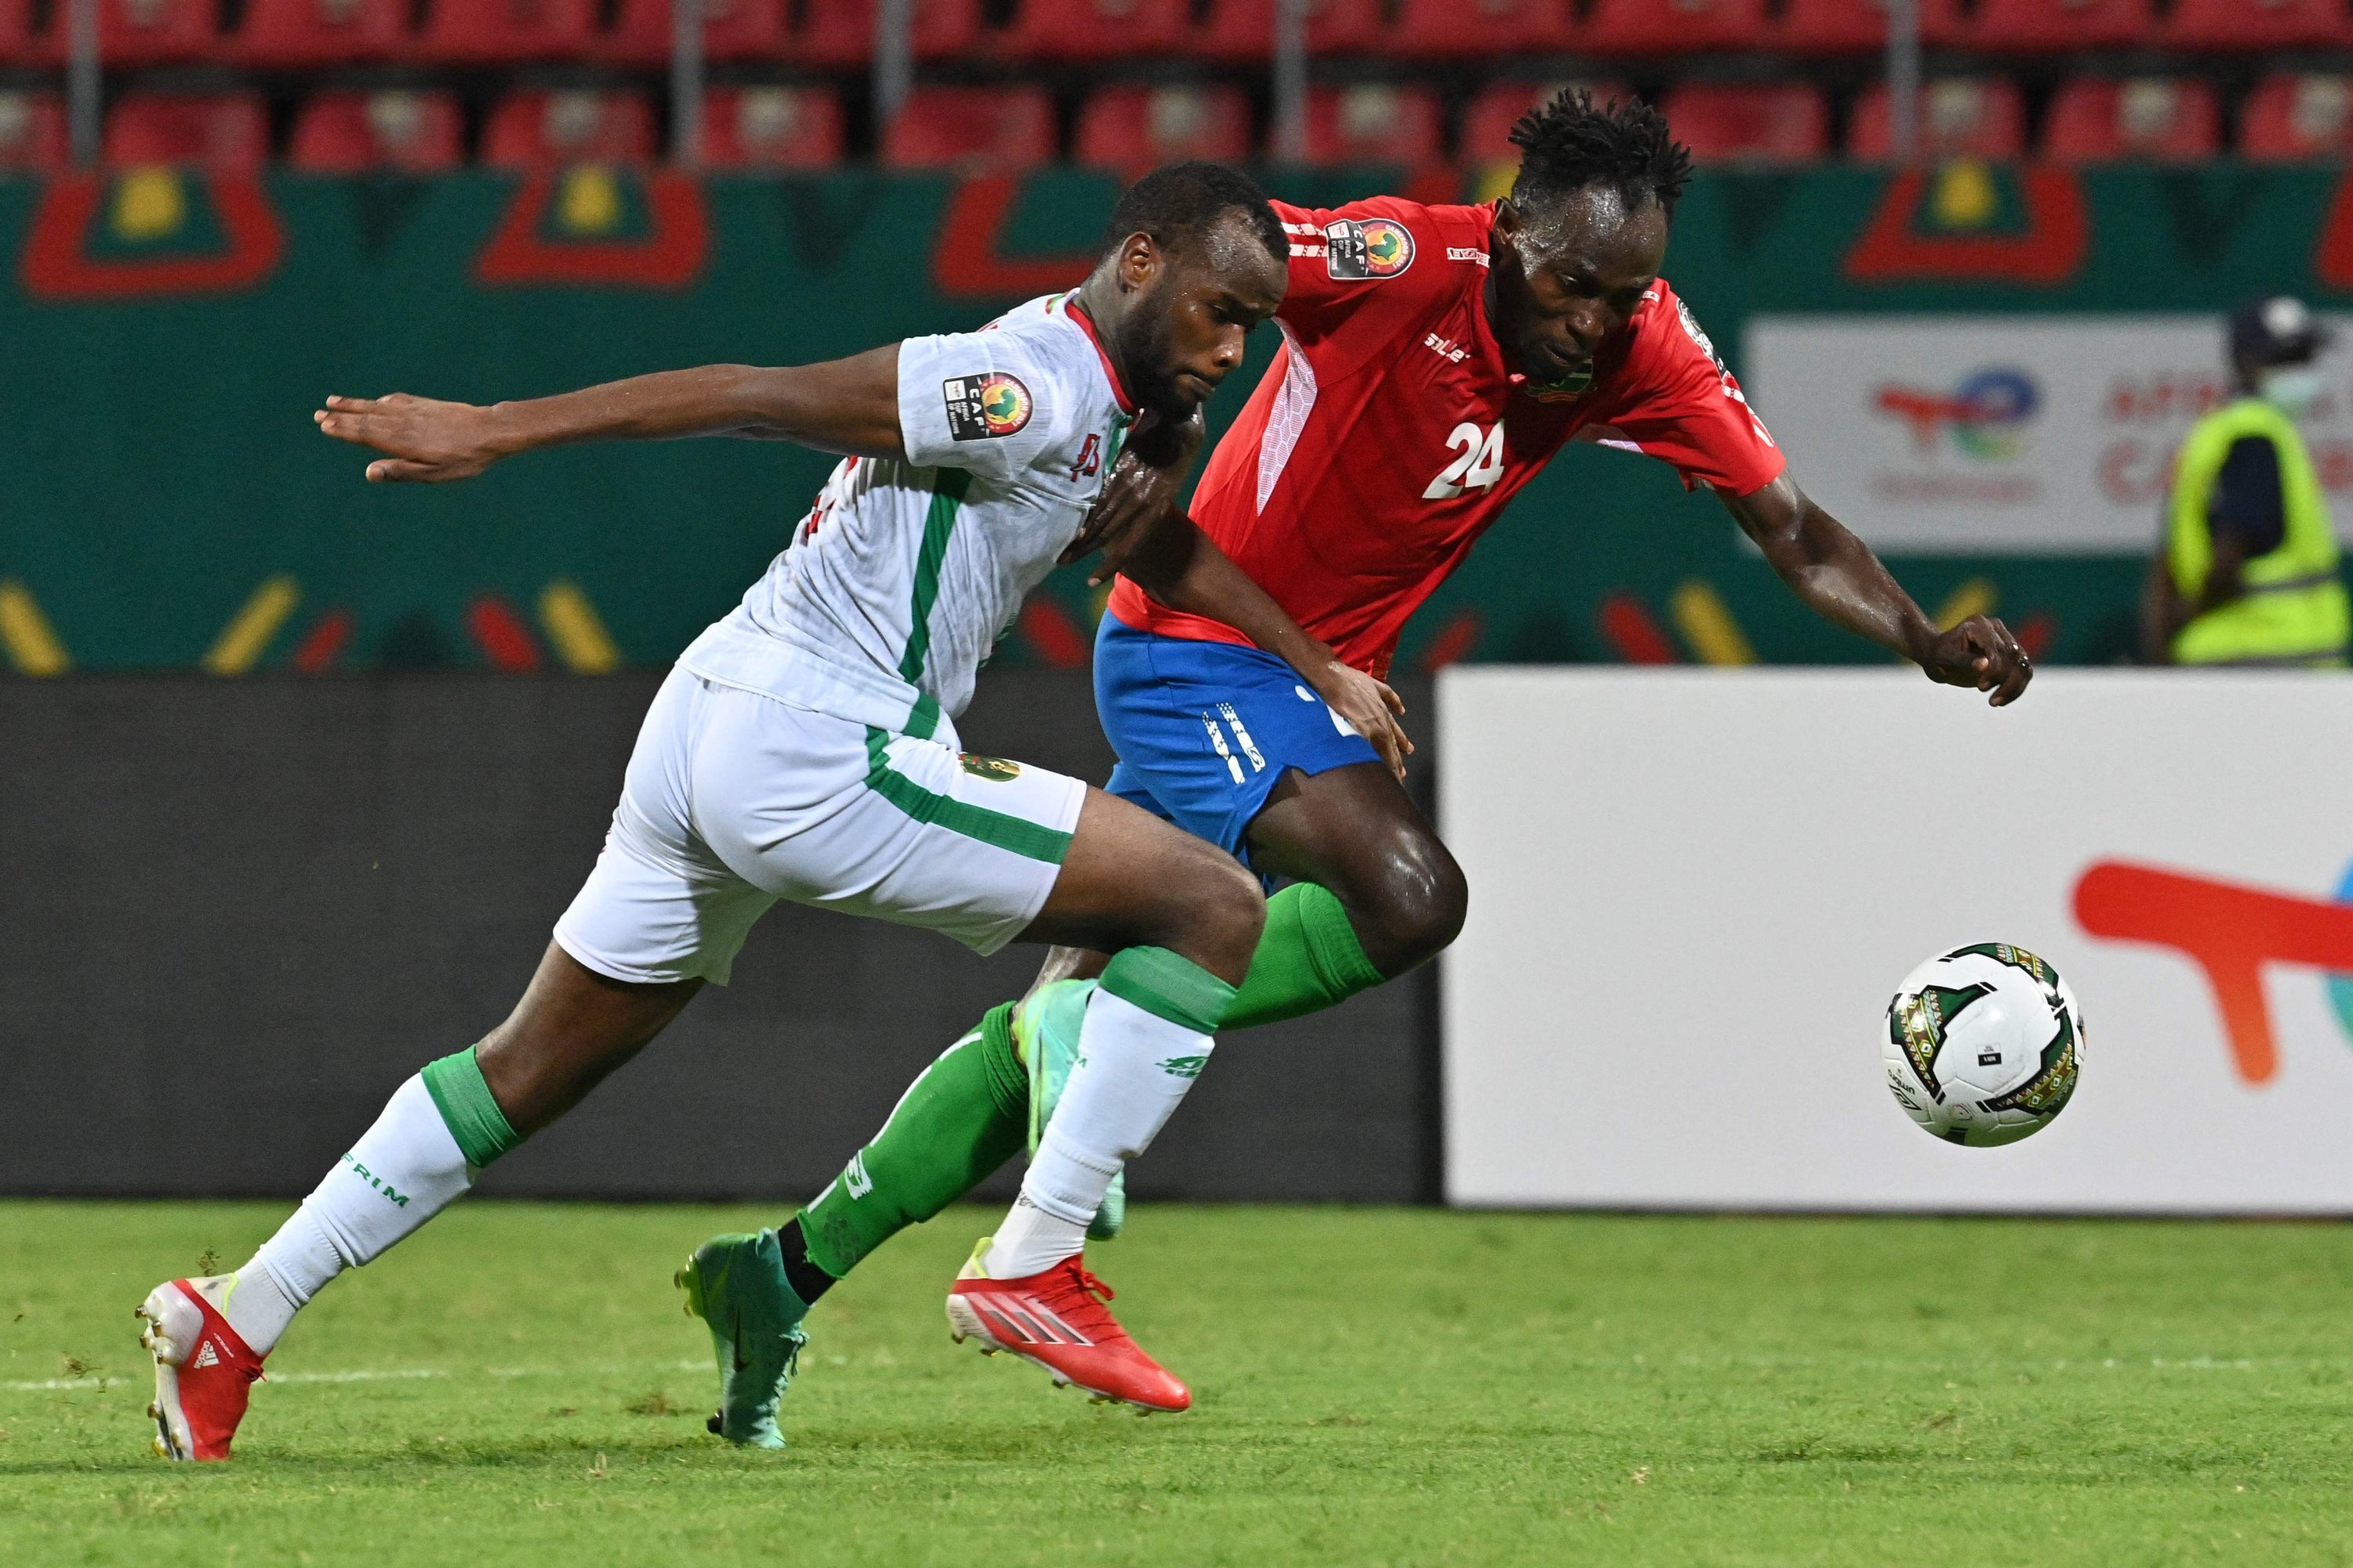 Gambia's Dembo Darbou (L) is challenged during an Africa Cup of Nations match against Mauritania, Limbe, Cameroon, Jan. 12, 2022. (AFP Photo)